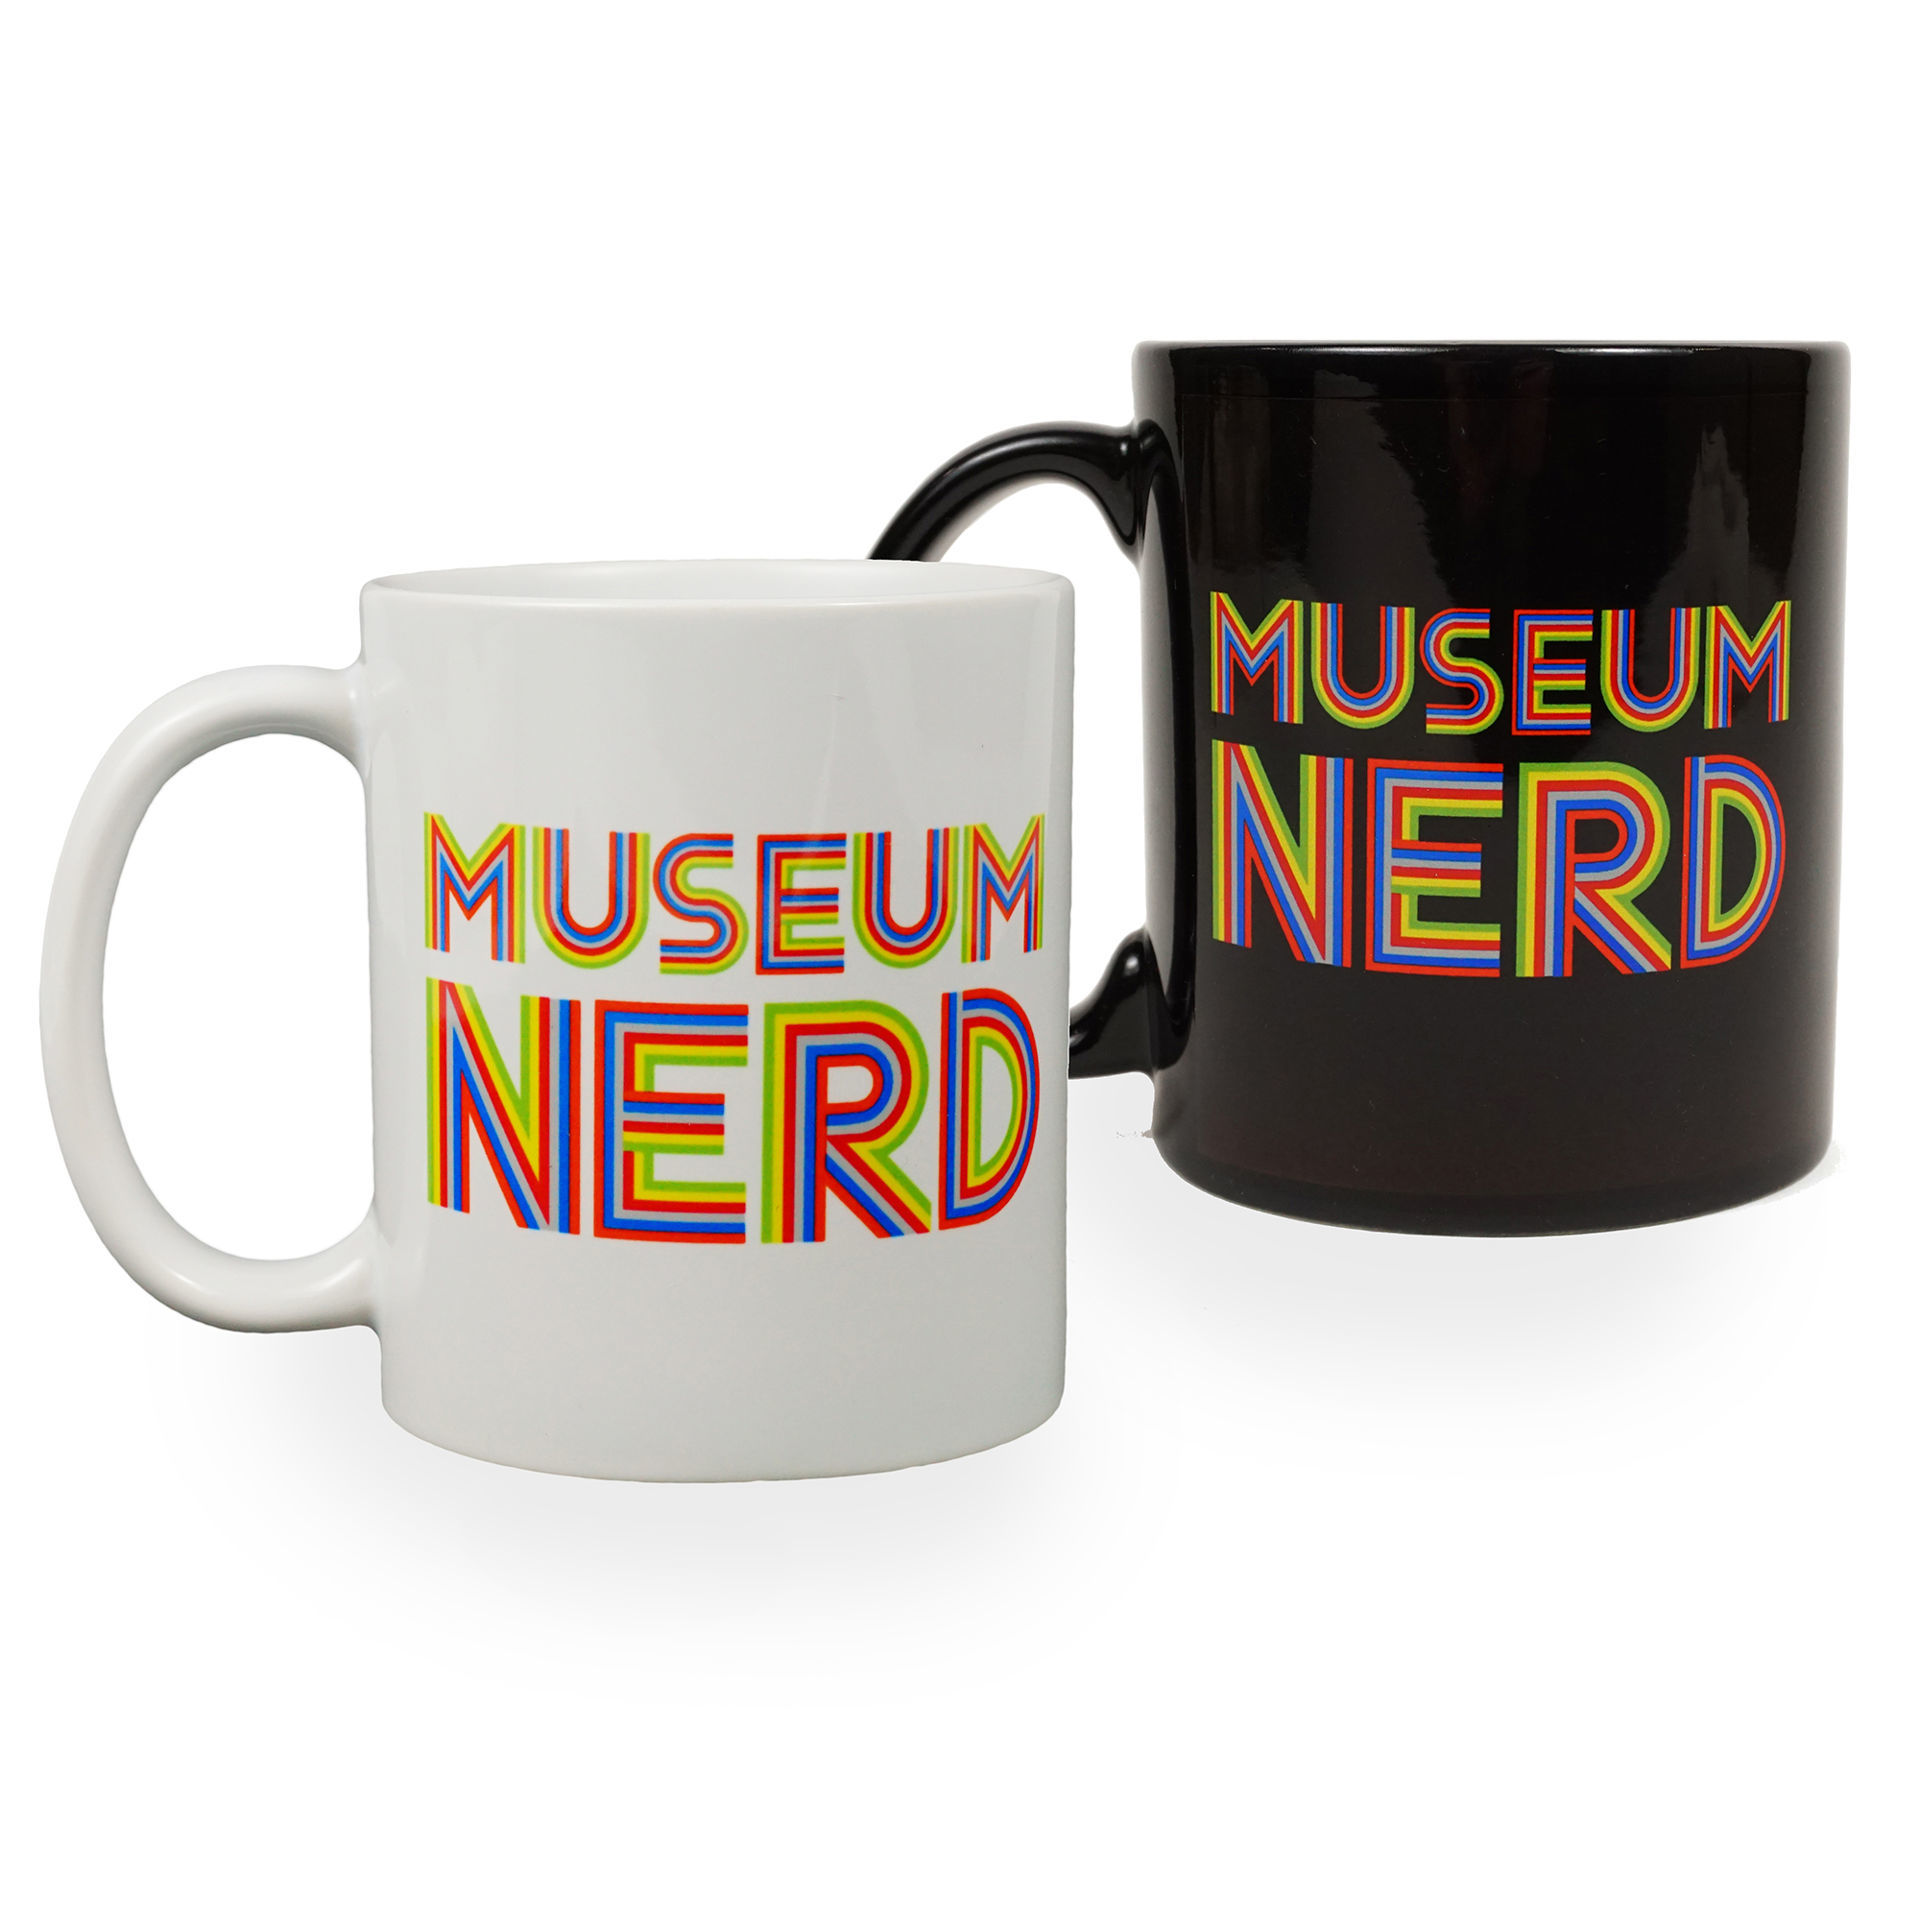 Two mugs, one white, one black, with the words 'Museum Nerd' in stripey tri-colored block lettering